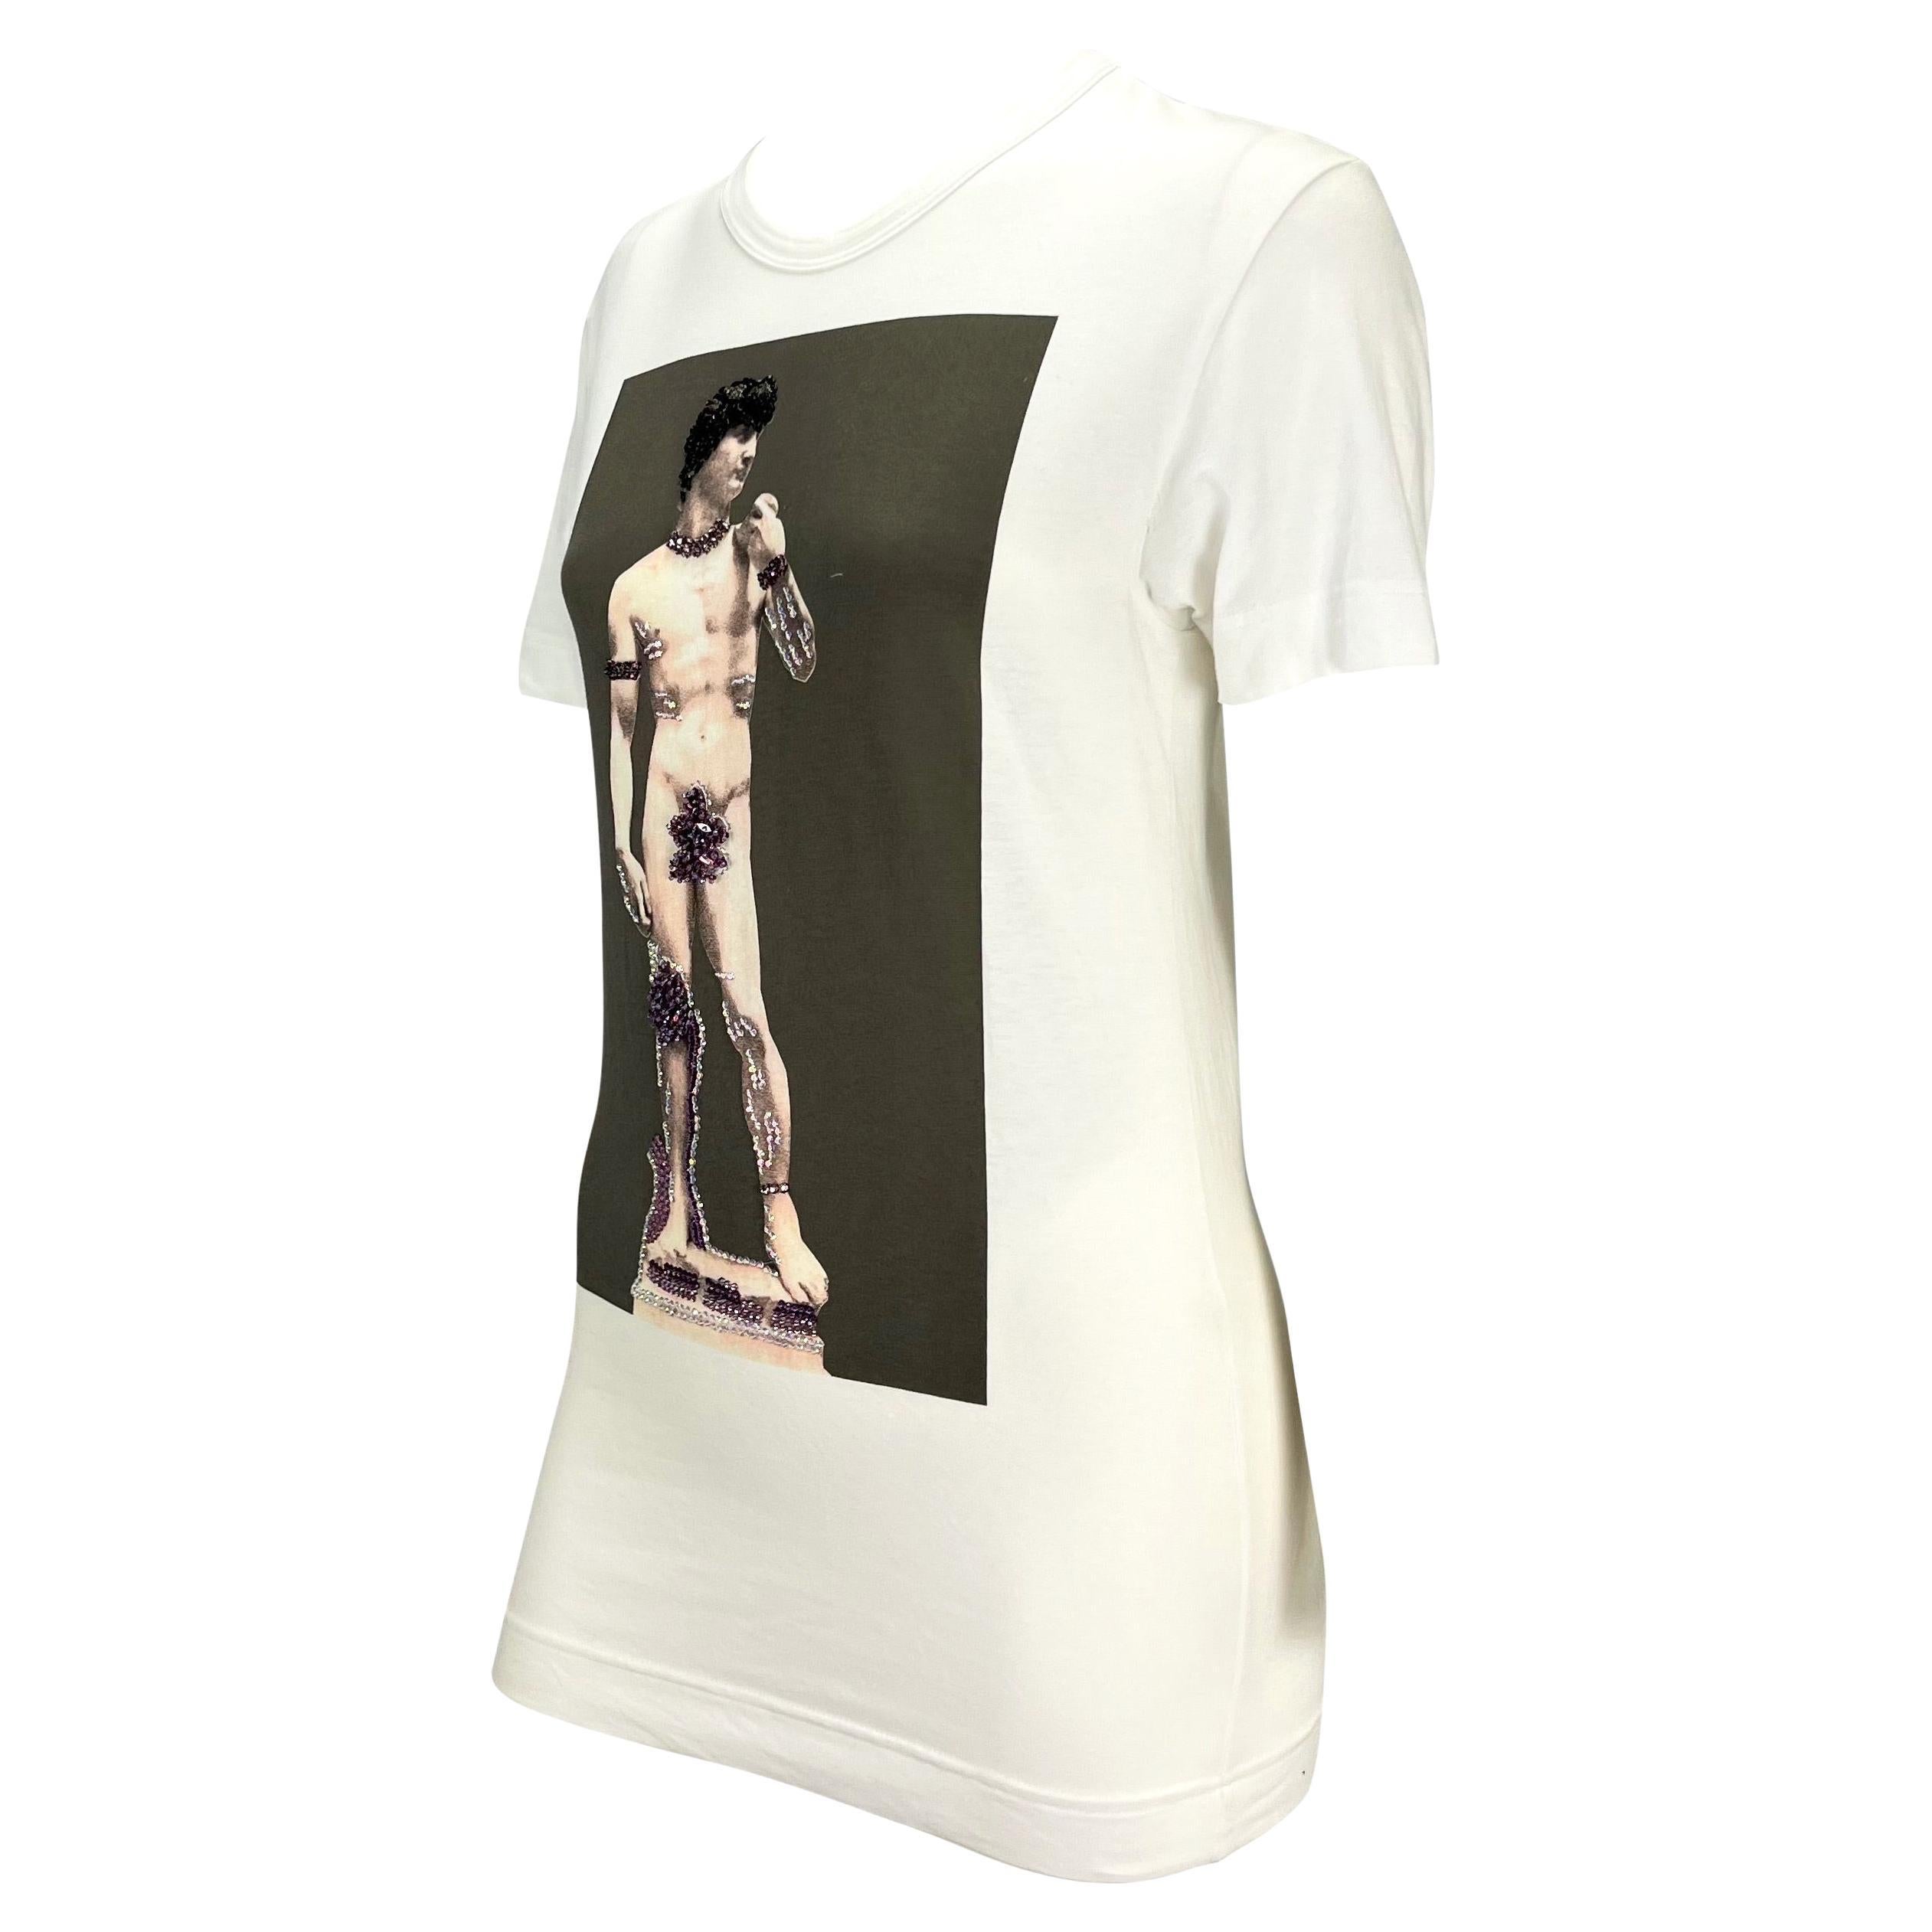 Presenting a fabulous printed Dolce and Gabbana t-shirt. From the Fall/Winter 2001 collection, this incredible t-shirt features a print of Michaelangelo's famous David sculpture in black and white. The print is camped up with bead and rhinestone